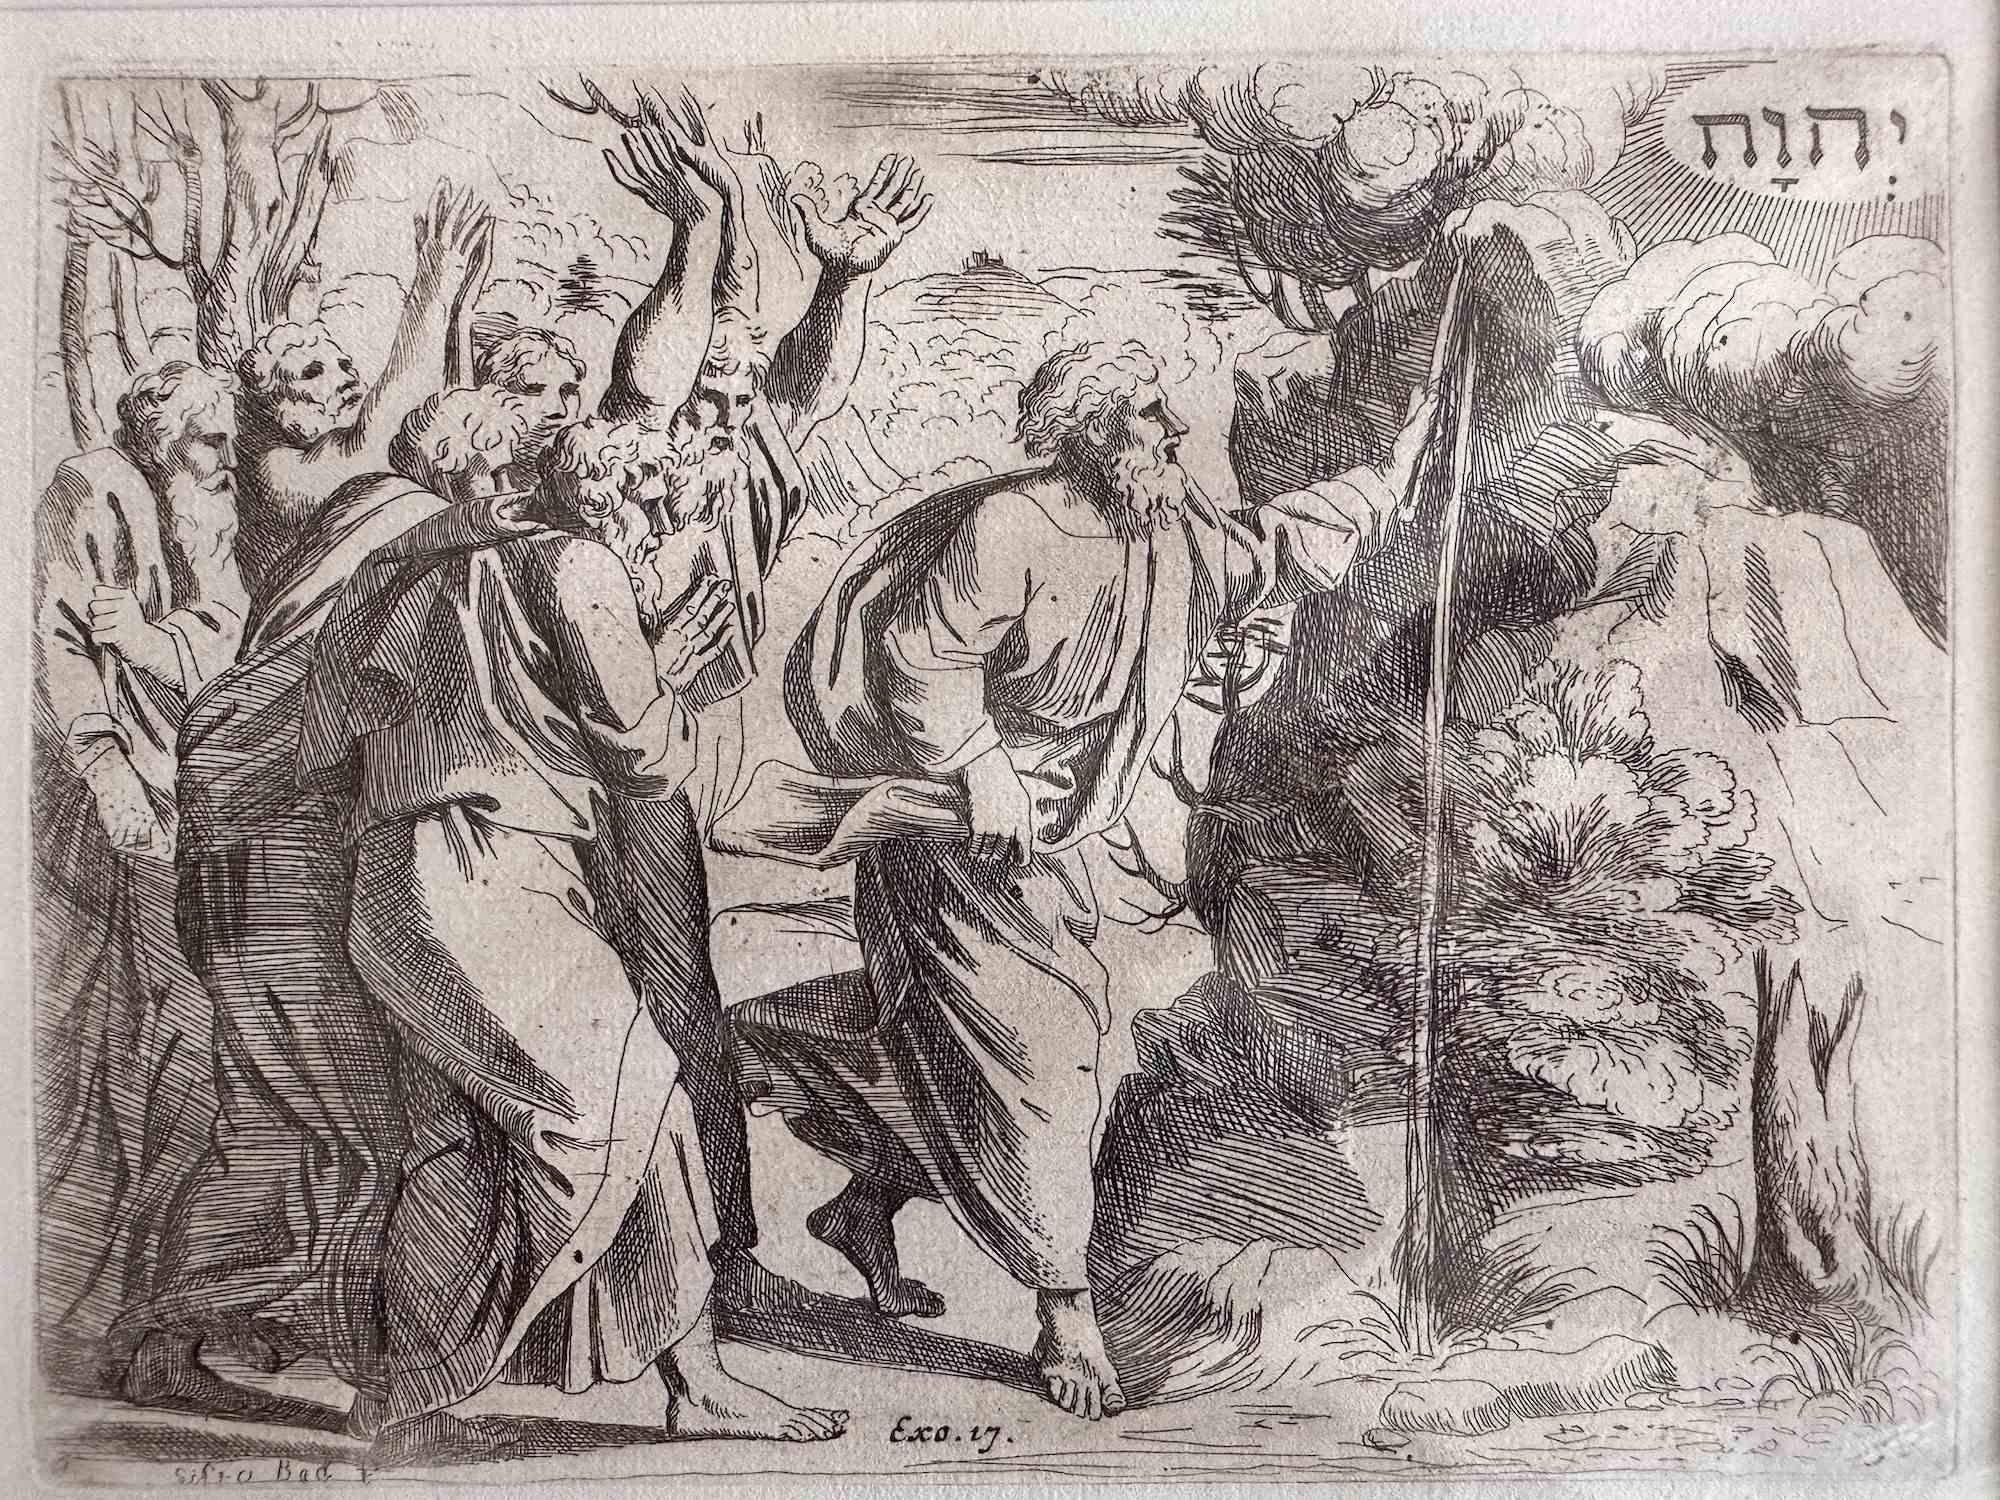 Giovanni Lanfranco (Terenzo, 1582 - Rome, 1647) Figurative Print - Exo.17 - Old Testament Story - Etching by Giovanni Lanfranco - 1607